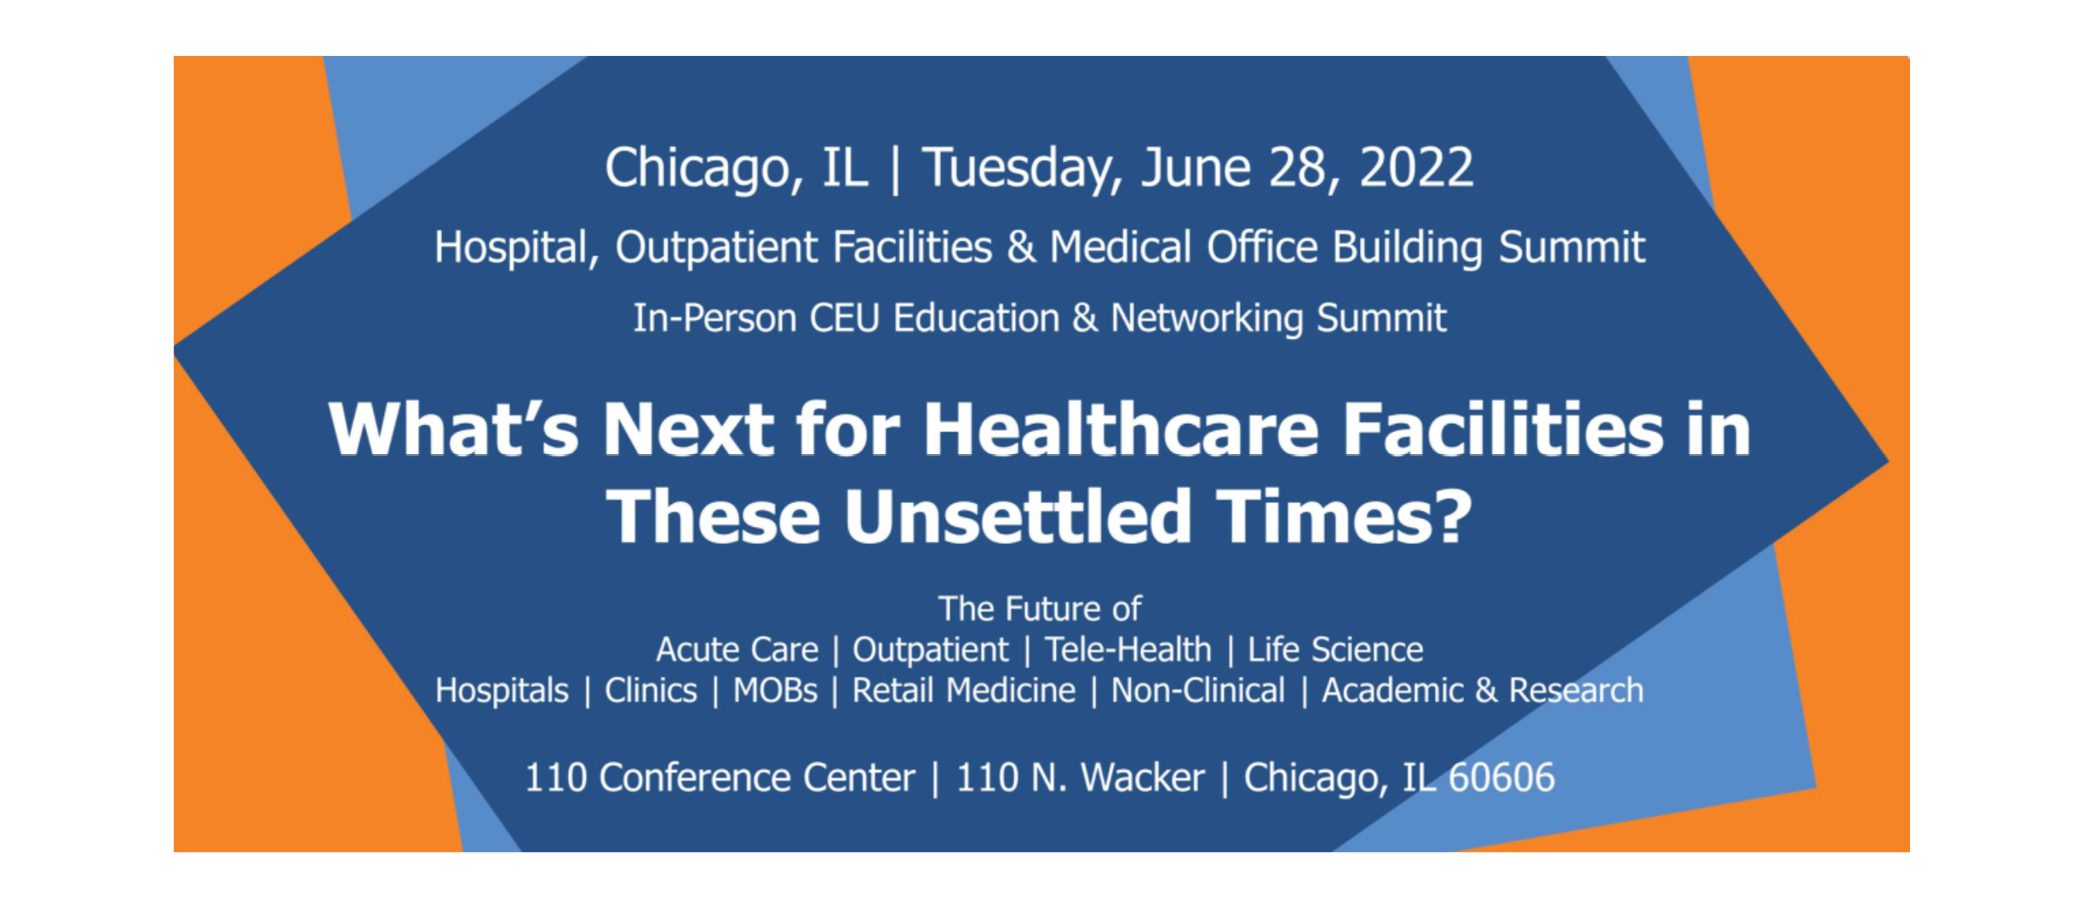 What's Next for Healthcare Facilities - June 2022 Event - Chicago